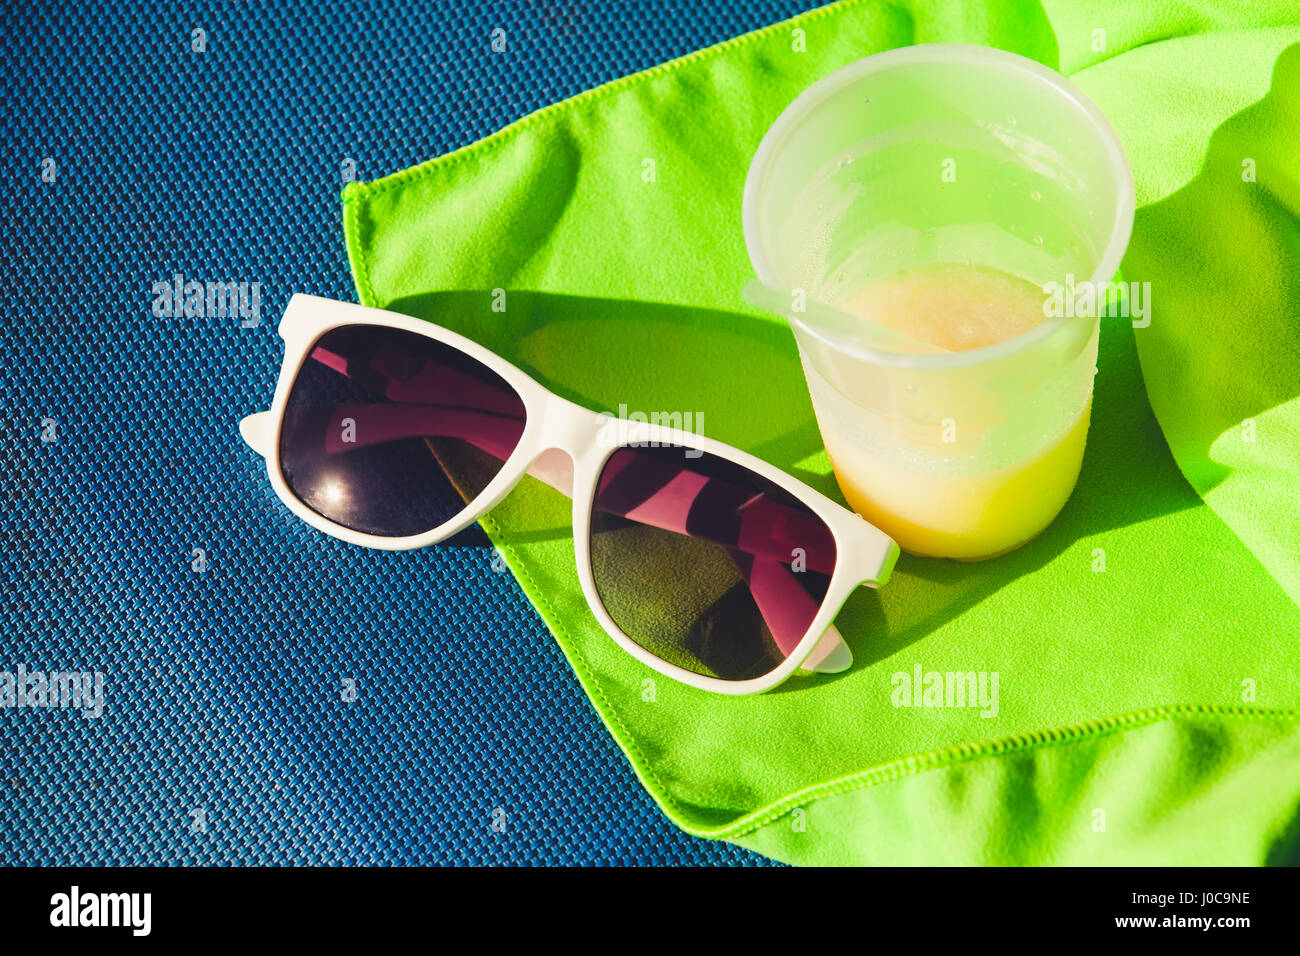 Sunglasses and plastic glass of juice stand on green towel over blue sun lounger, summer beach resort vacation theme Stock Photo